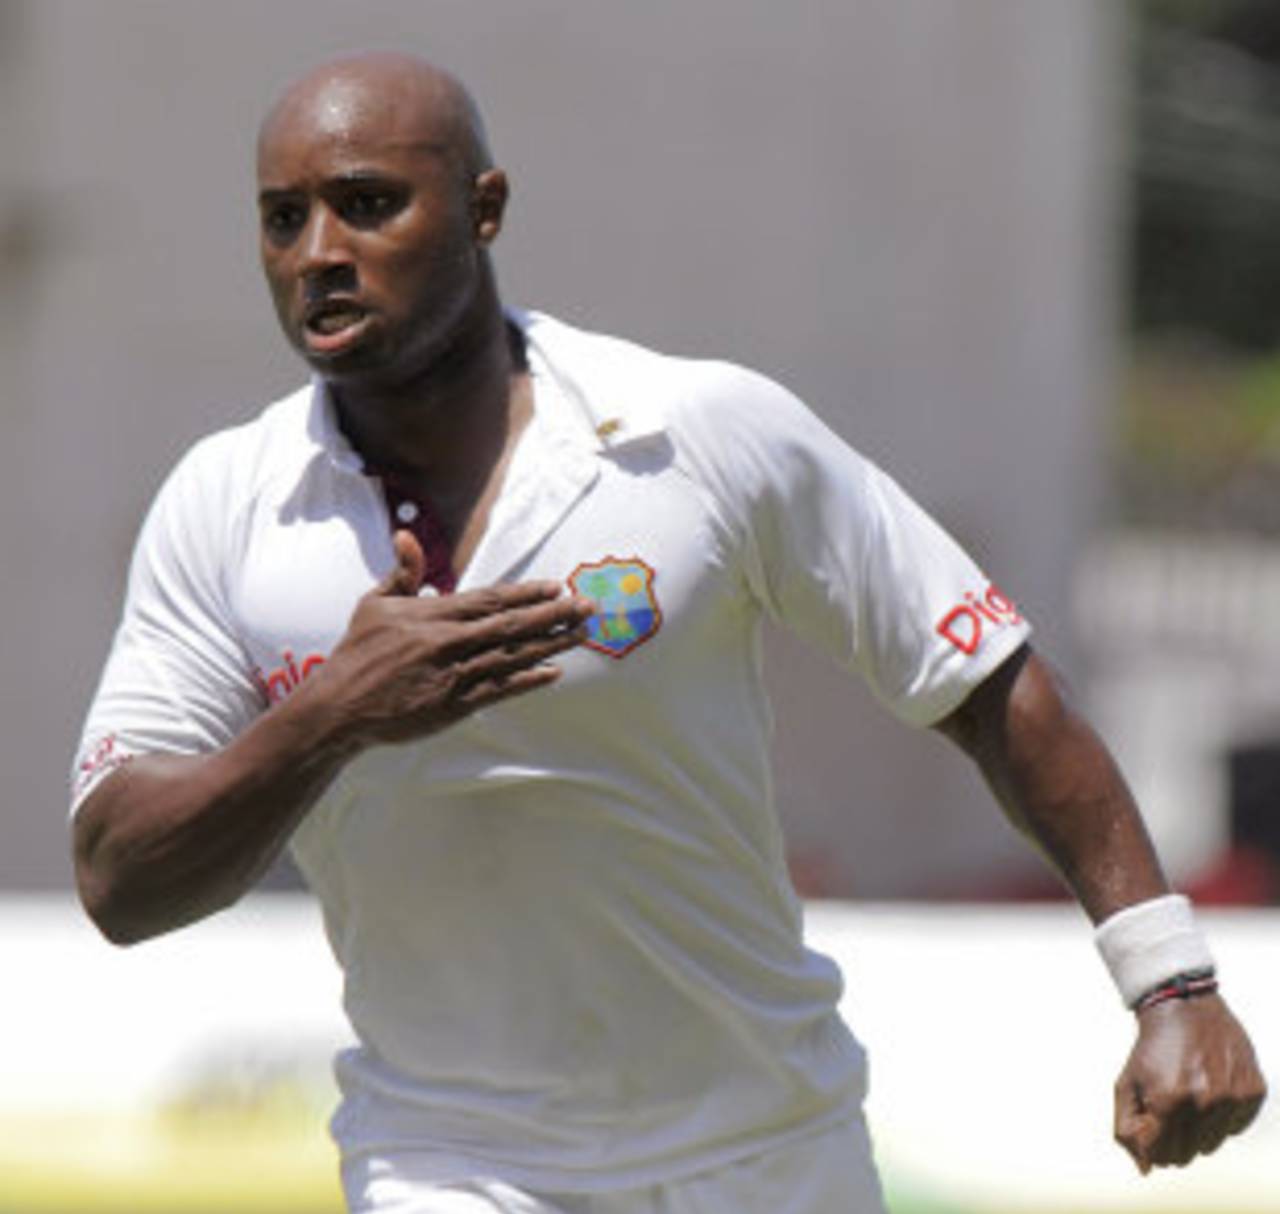 A pumped-up Tino Best celebrates a wicket, West Indies v New Zealand, 2nd Test, Jamaica, 3rd day, August 4, 2012